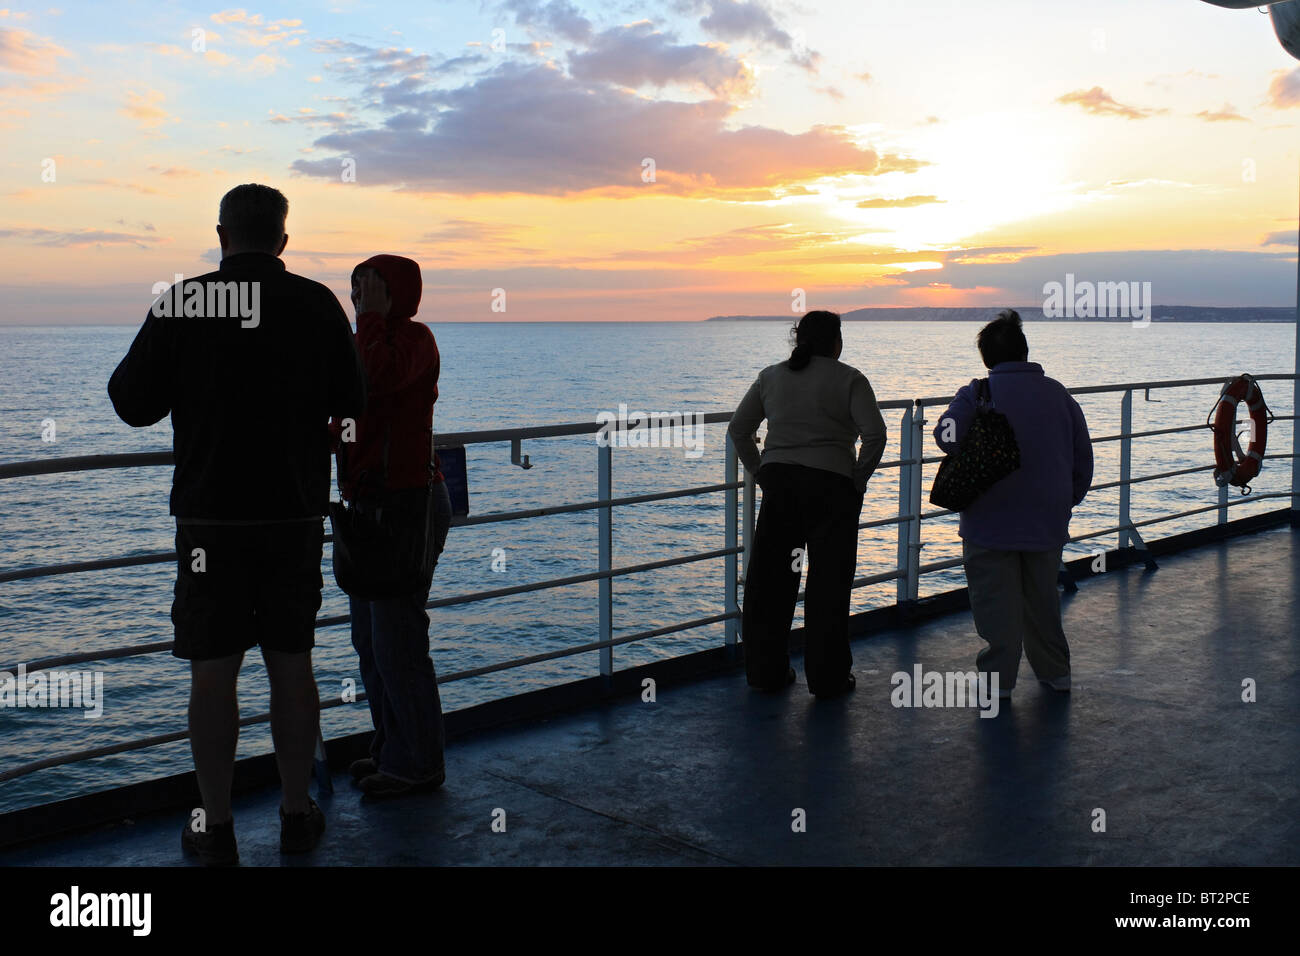 Sunset on board Sea France ferry coming into port of Dover after crossing the English Channel from Calais. Stock Photo